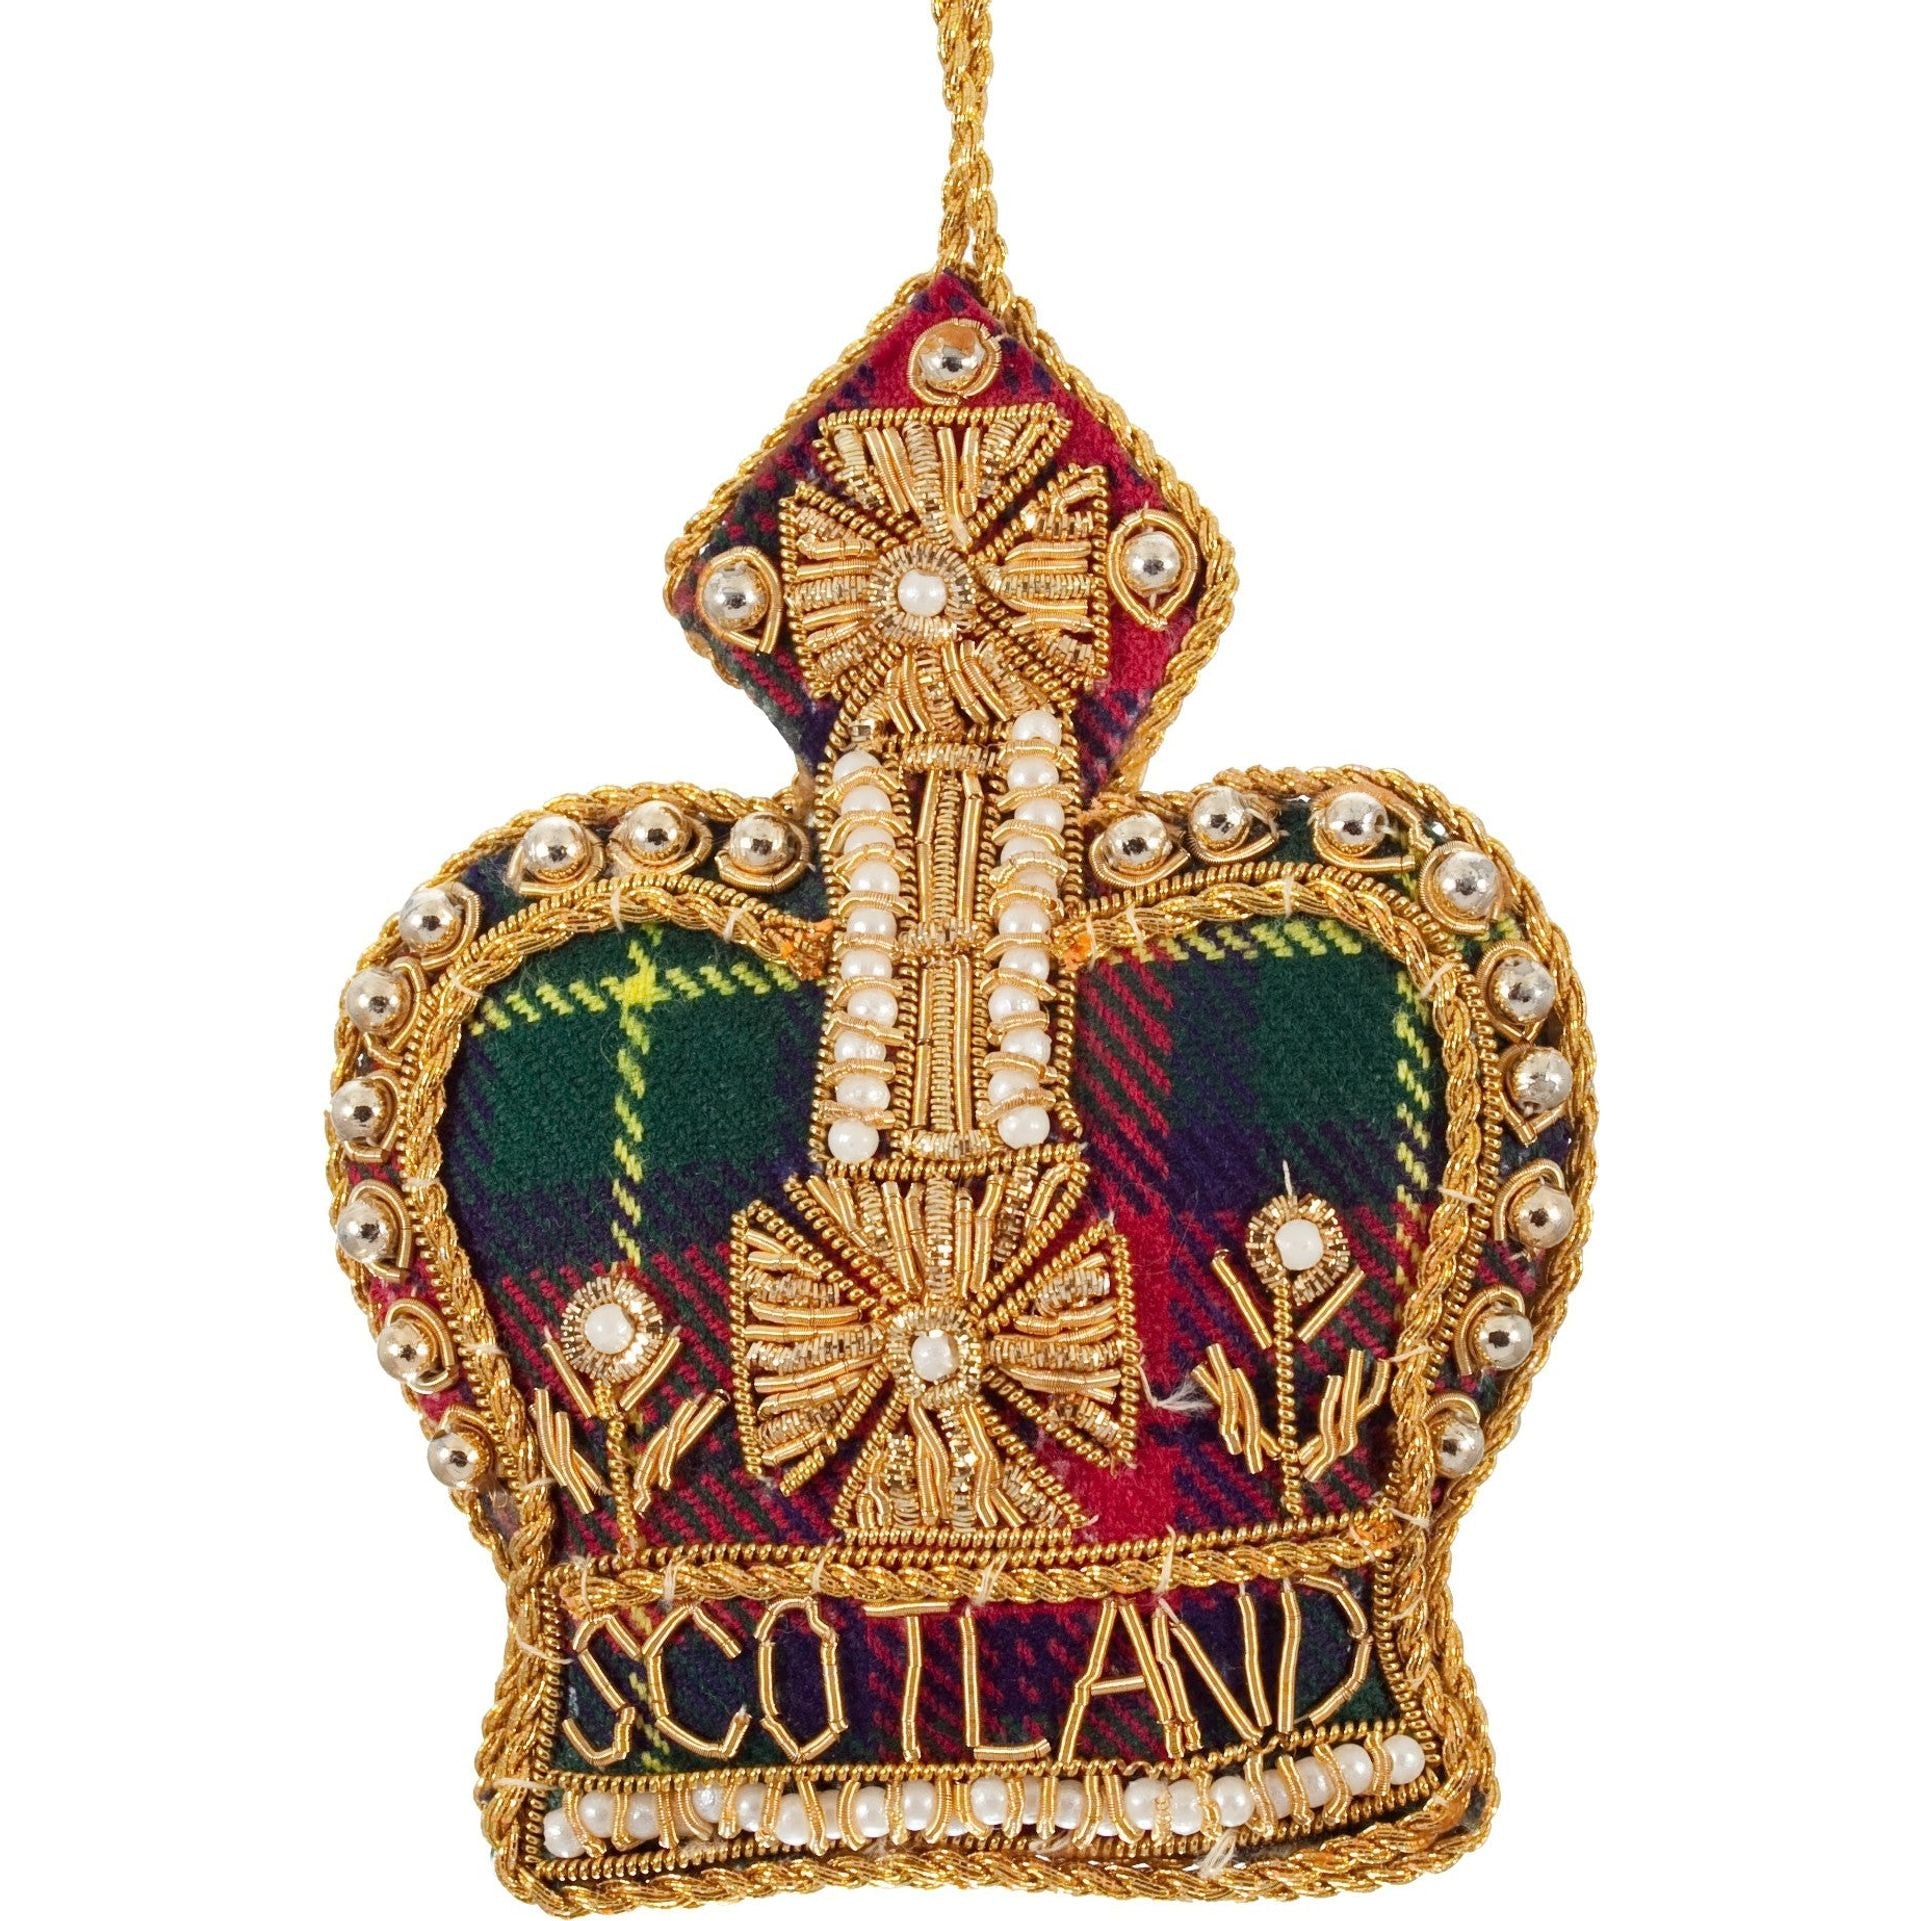 Embroidered Scotland Crown Decoration - ABF The Soldiers' Charity Shop